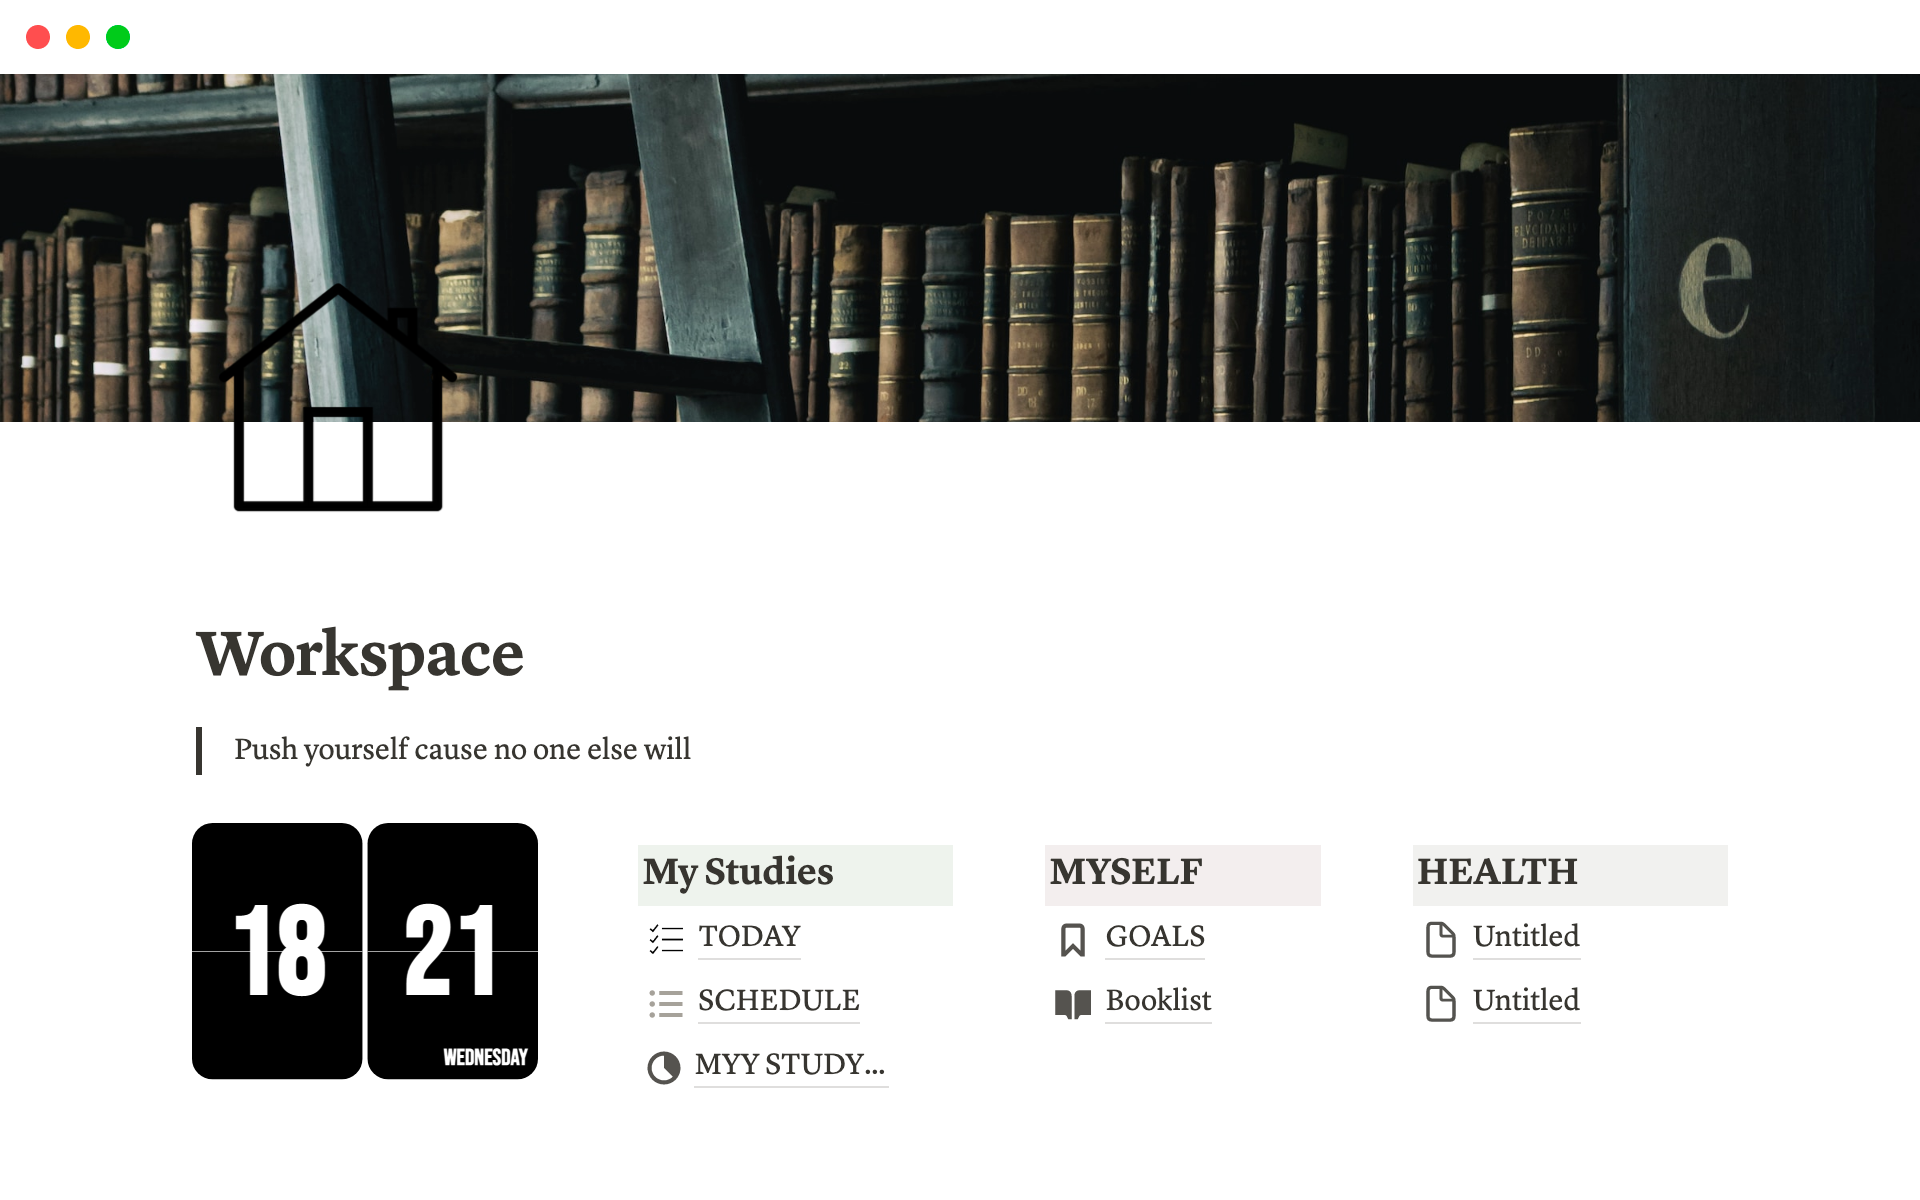 Helps to organize all your notion pages.